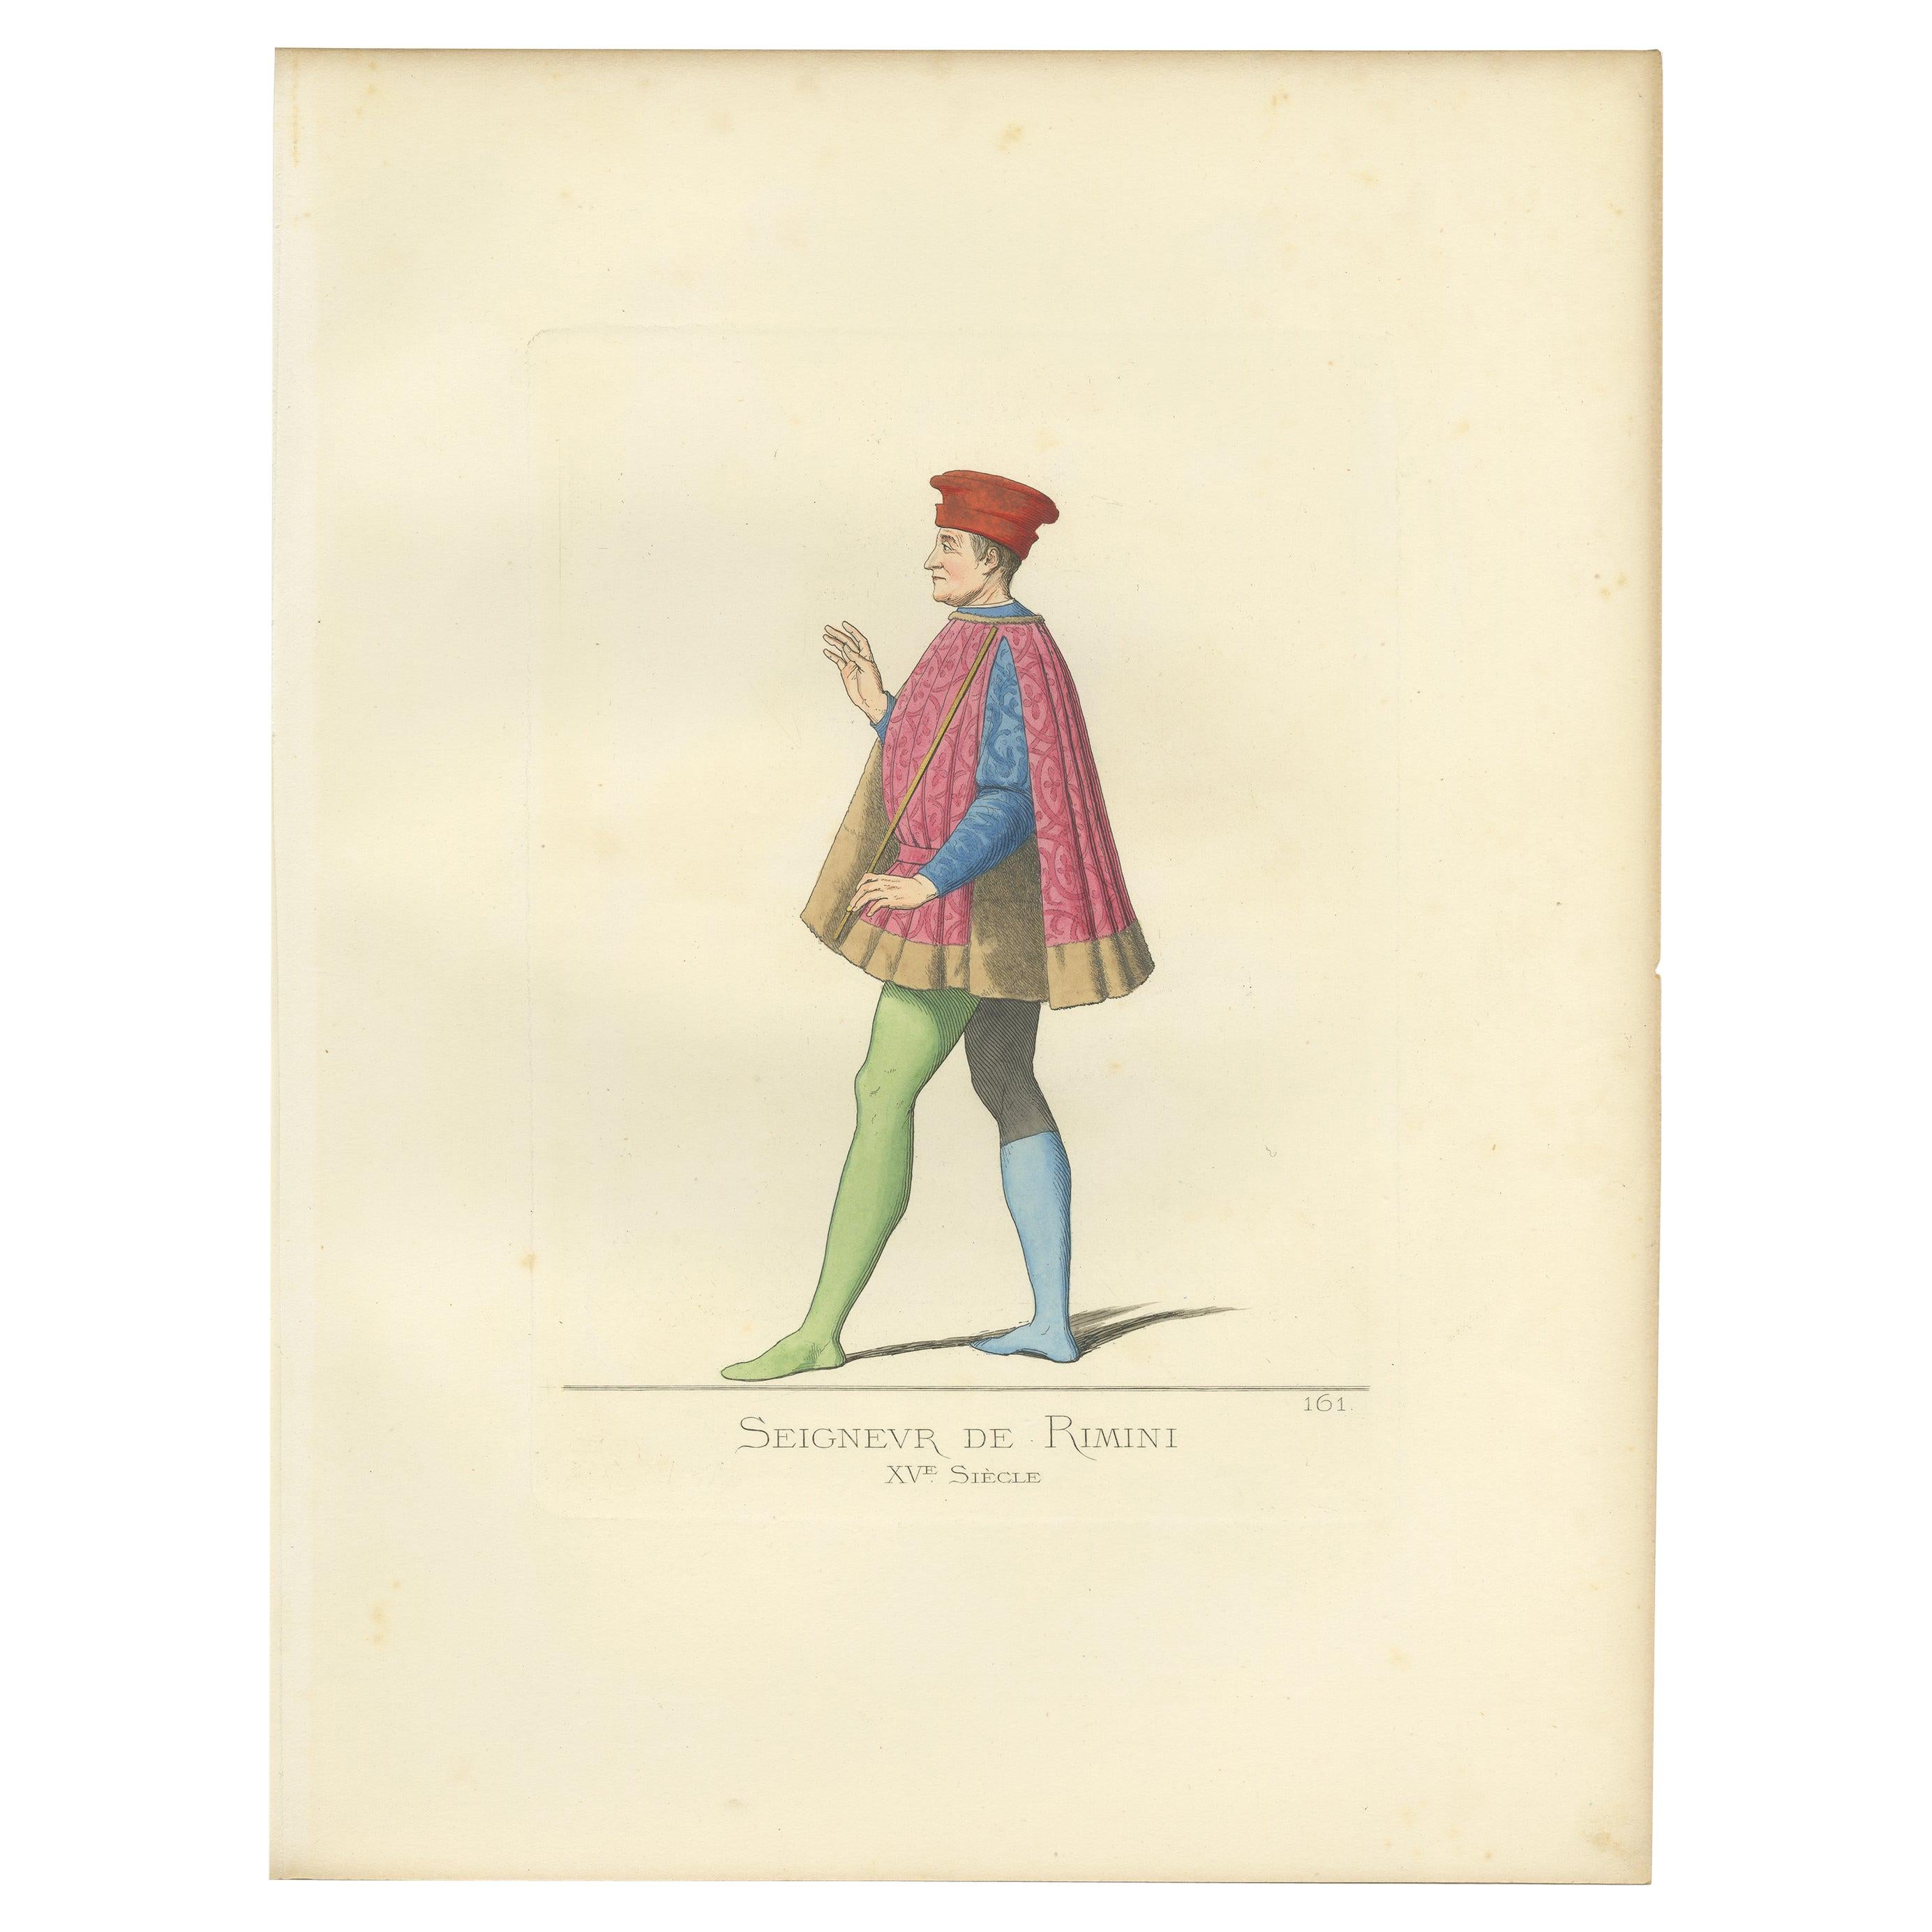 Antique Print of the Prince of Rimini, by Bonnard, 1860